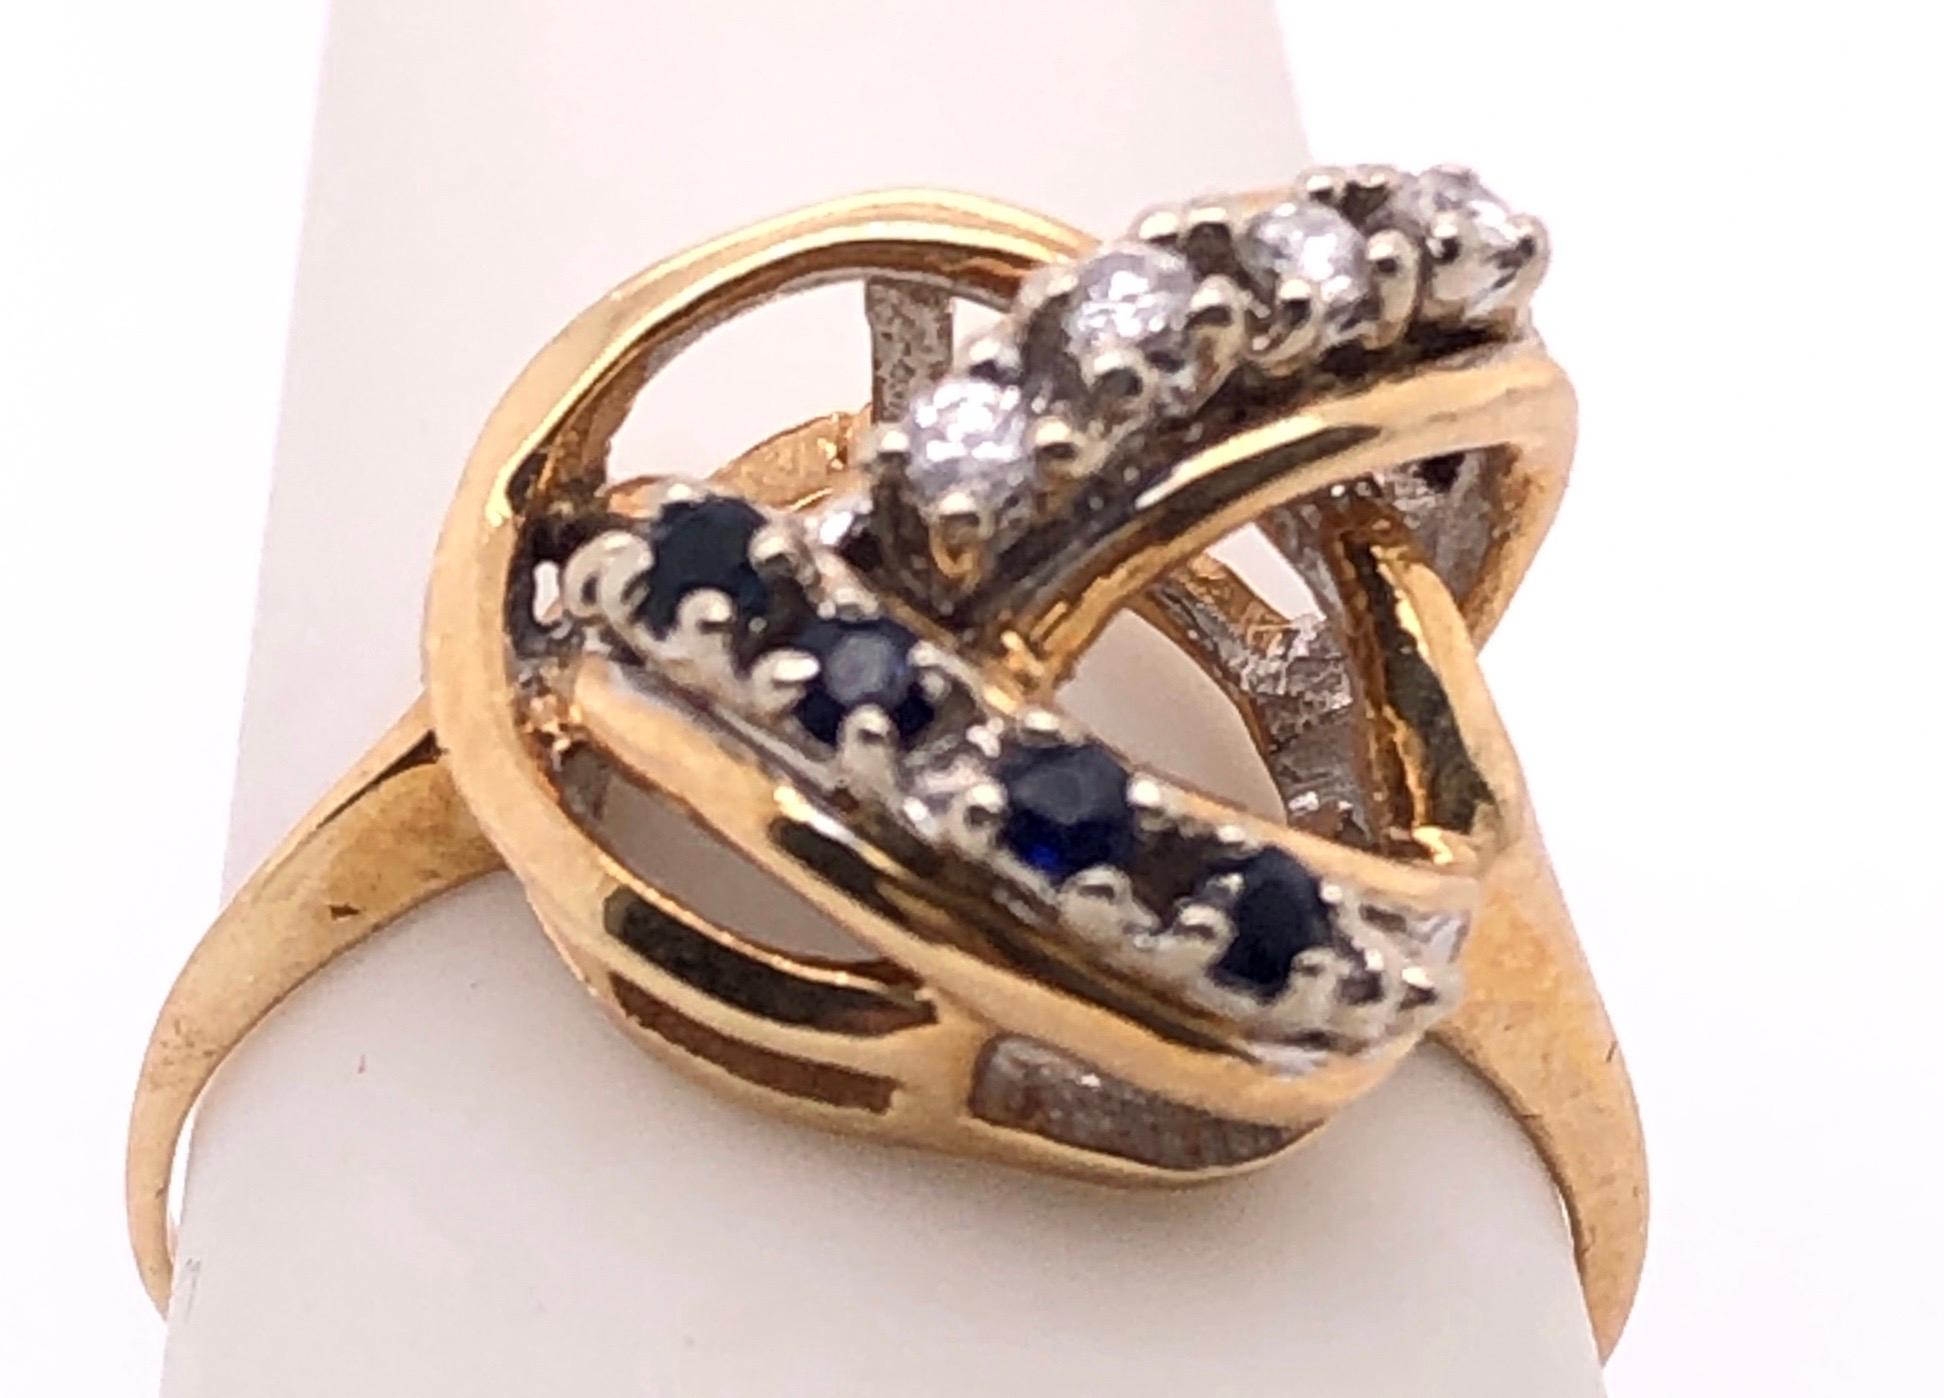 14 Karat Yellow Gold Contemporary Ring with Sapphires and Diamonds The prongs are in white gold. 
0.12 TDW.
Size 6.5
3 grams total weight.